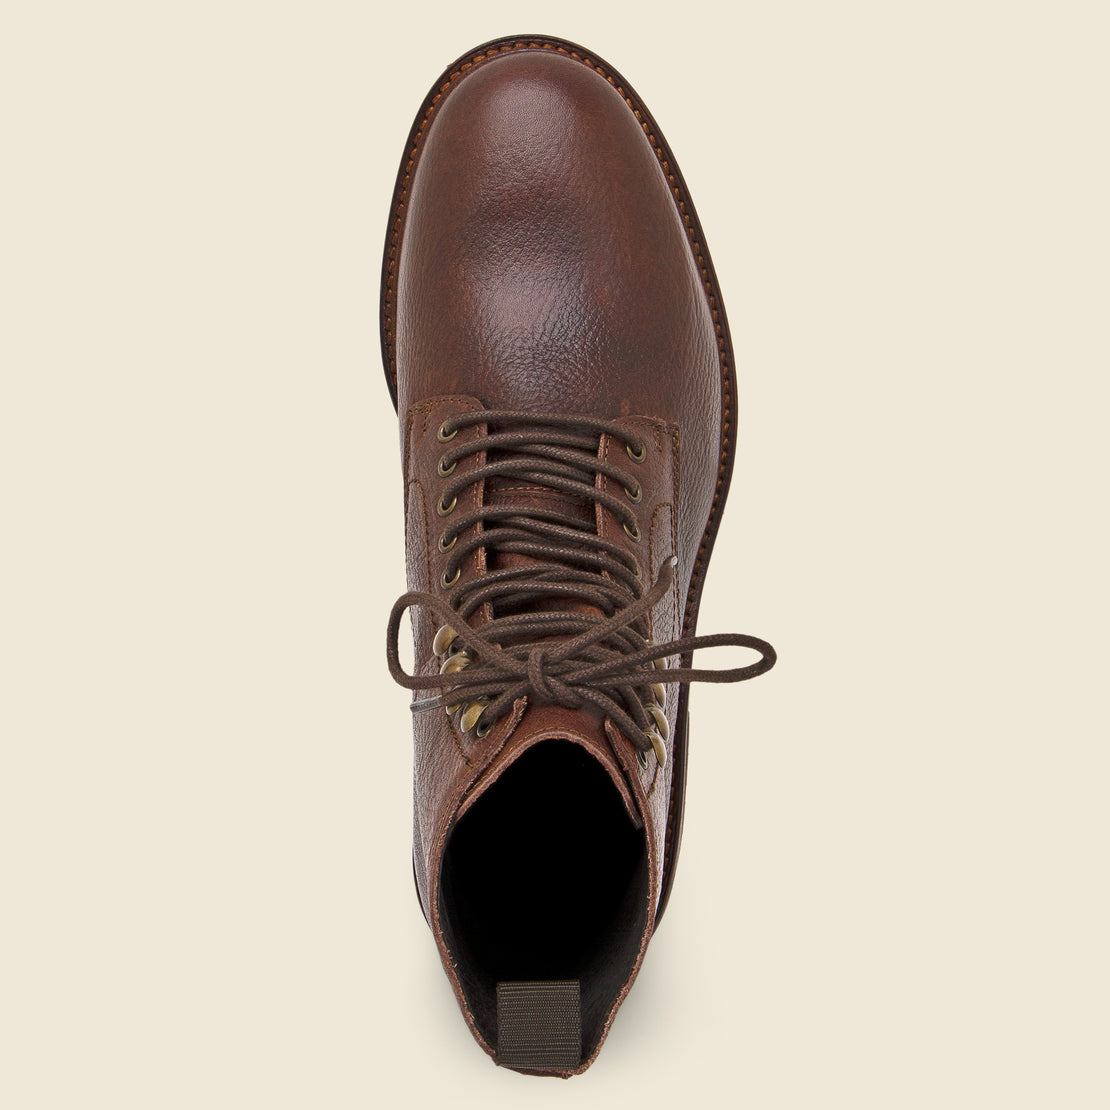 York Leather Lace Boot - Brown - Shoe the Bear - STAG Provisions - Shoes - Boots / Chukkas